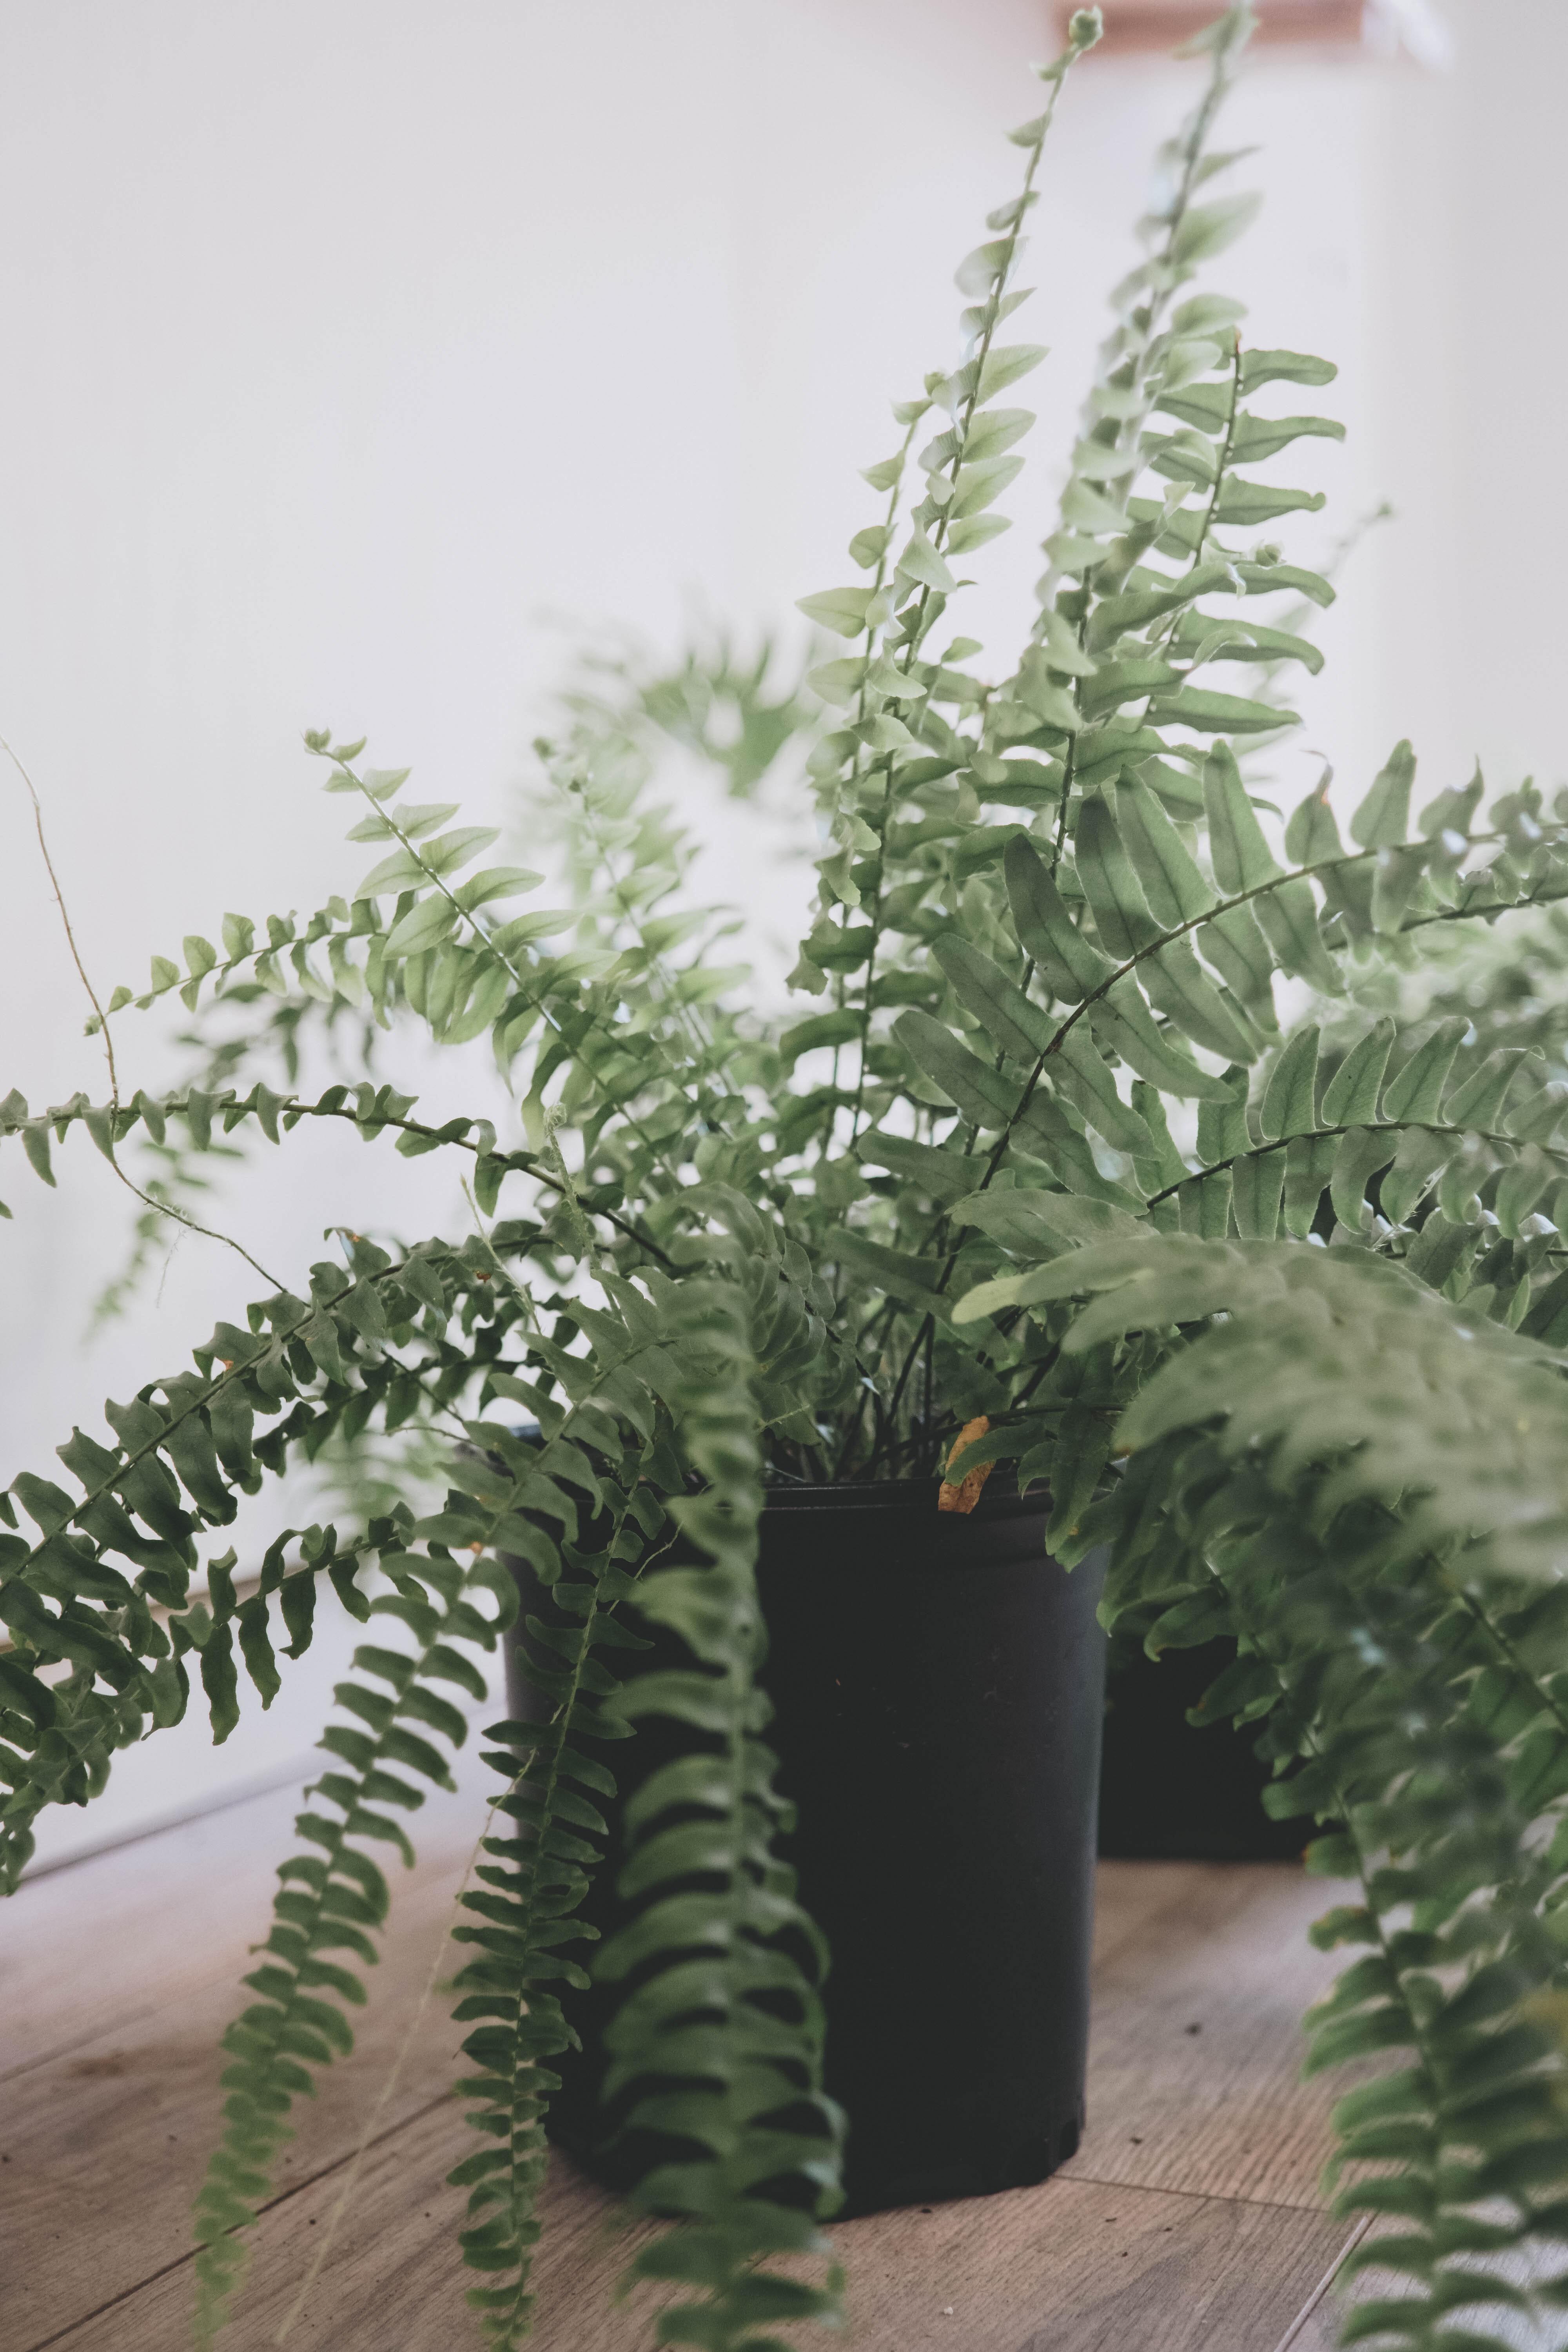 The Boston Fern is a non-toxic plant-friendly houseplant with long green leaves.